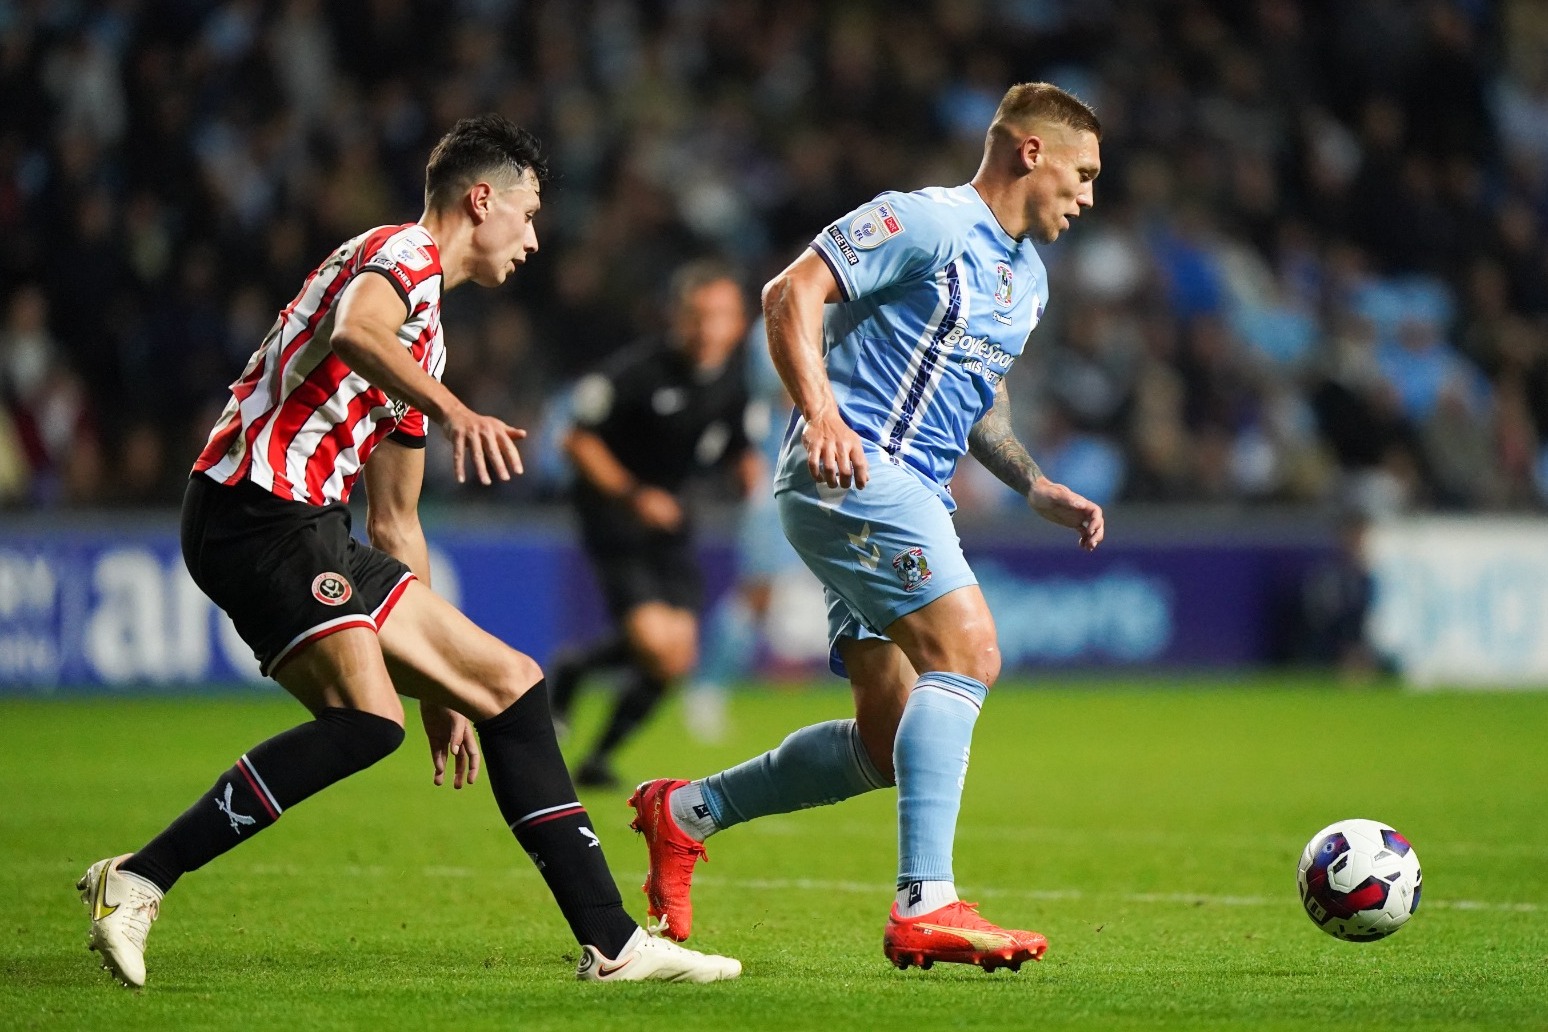 Coventry move off the bottom of the Championship by beating Sheffield United 